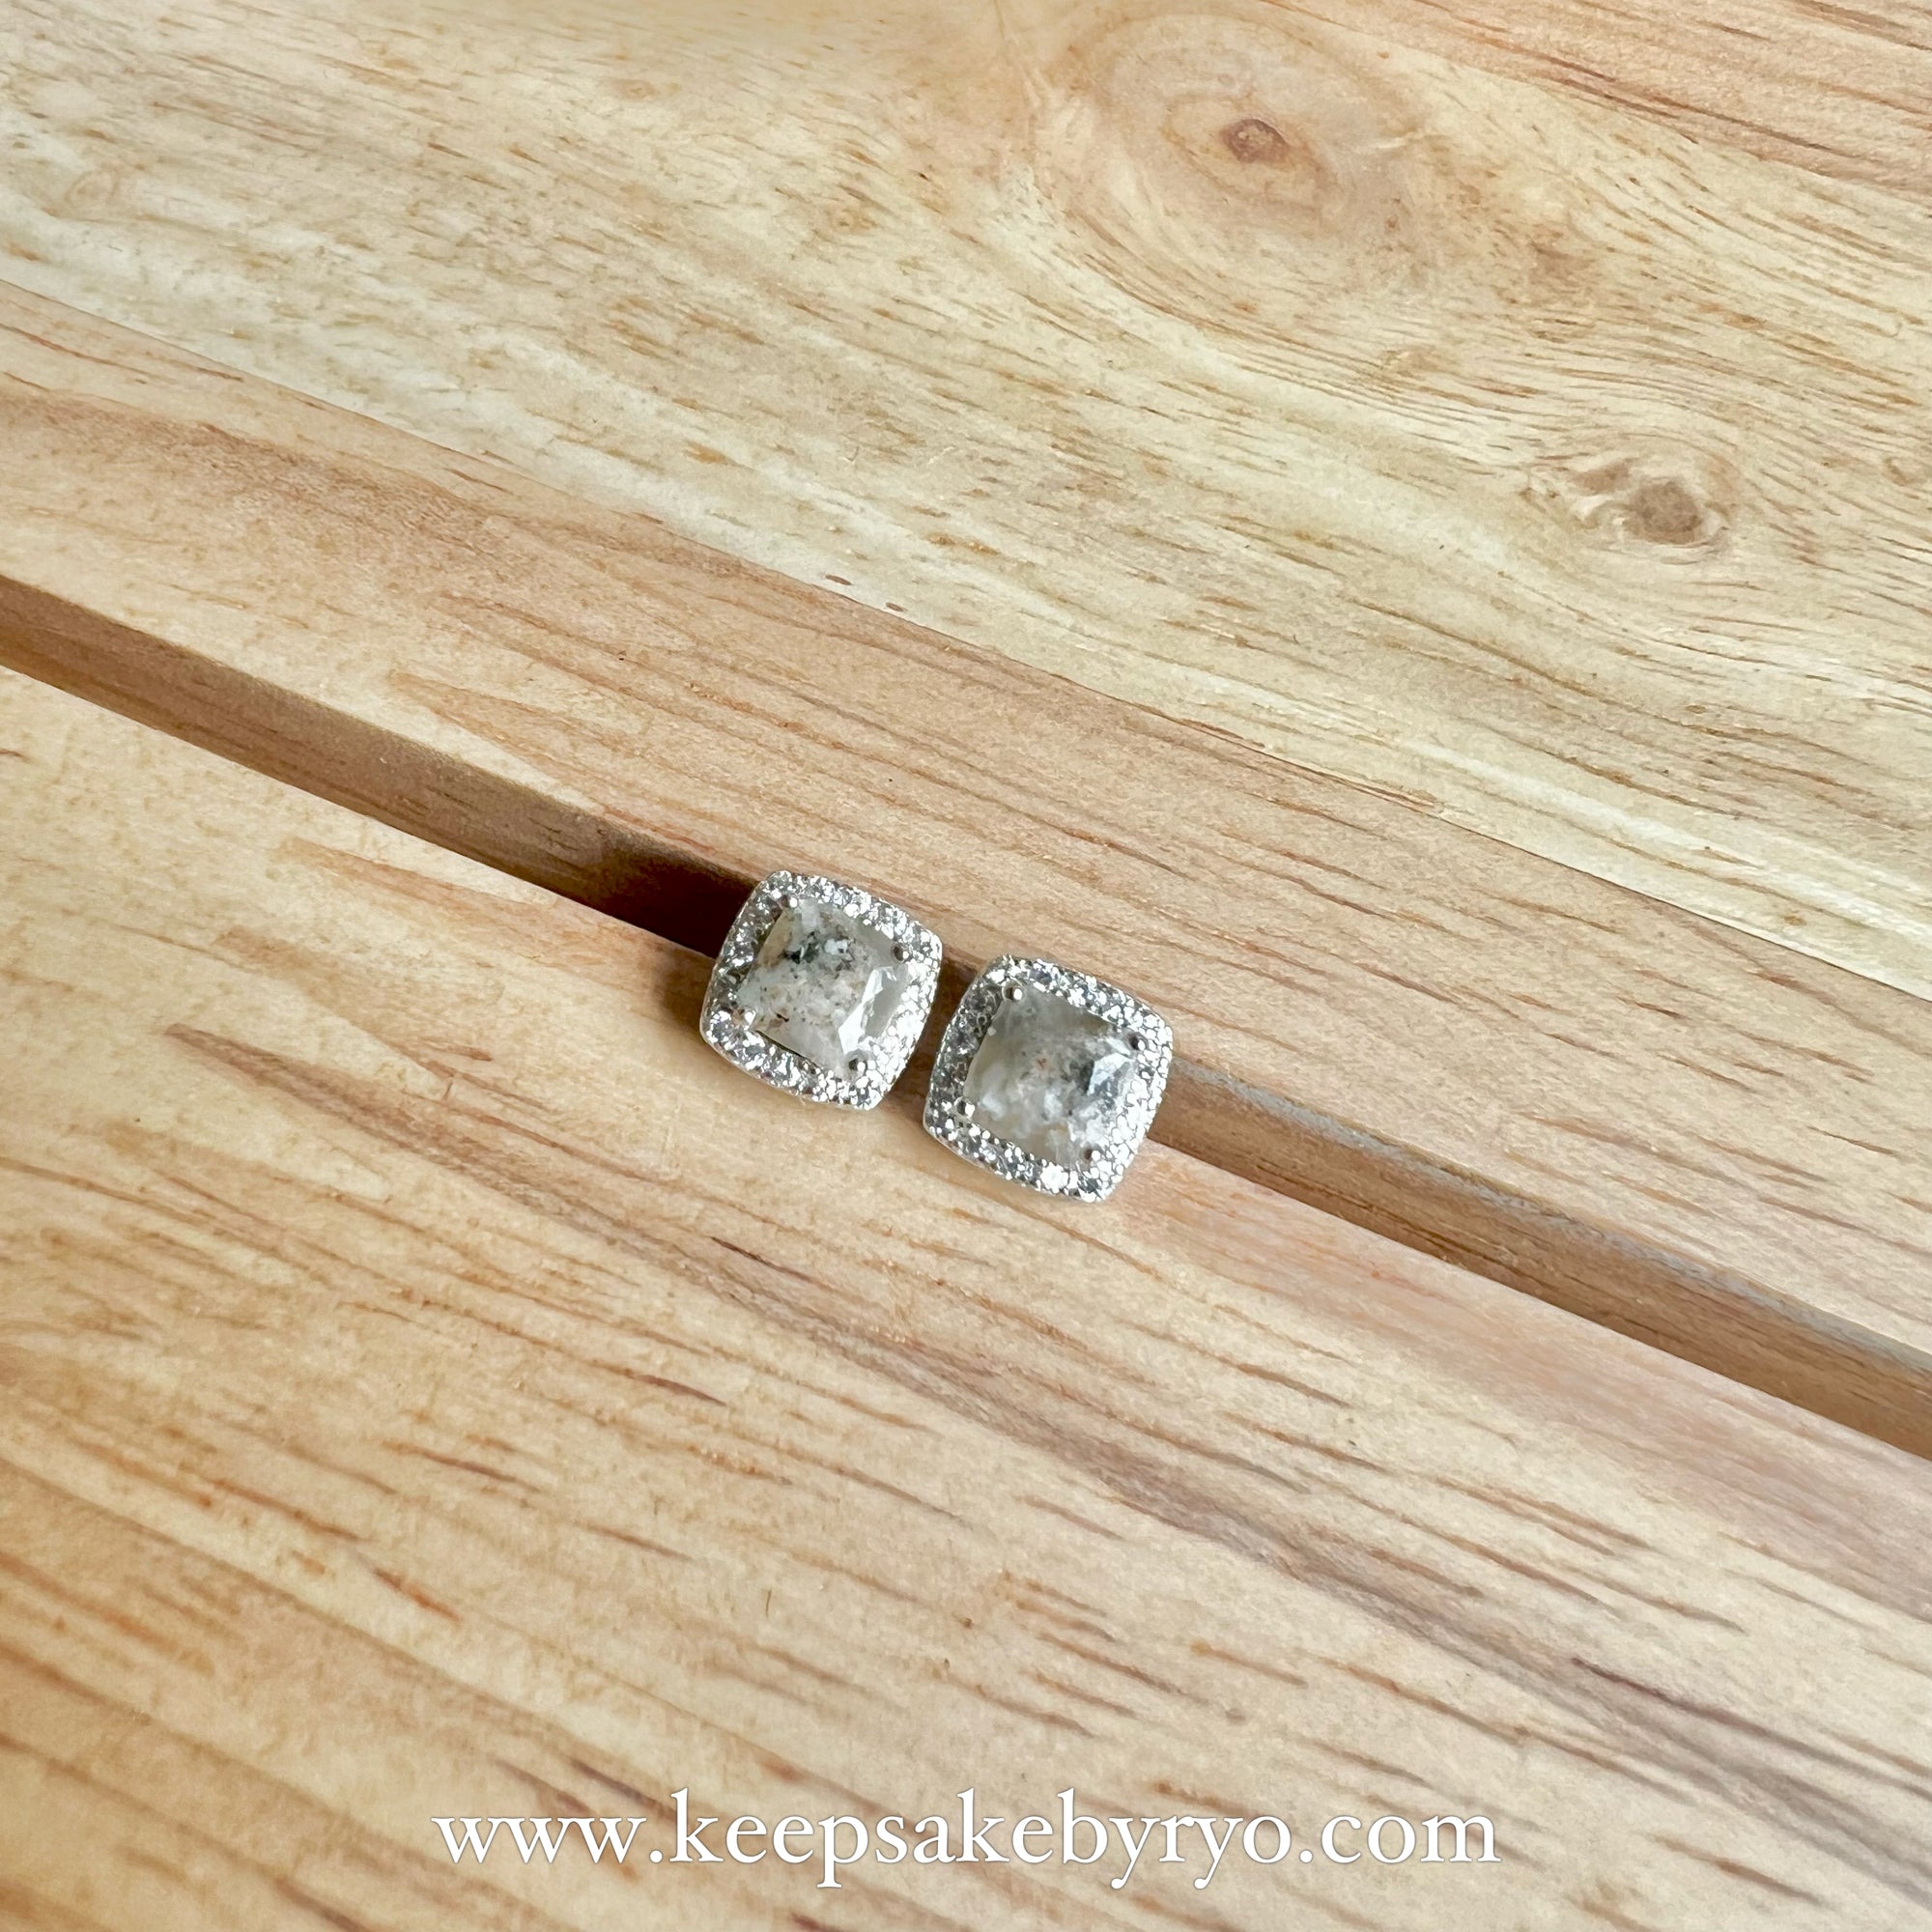 ASHES 925 SOLITAIRE: YARA STUD EARRINGS WITH CUSHION INCLUSION STONES